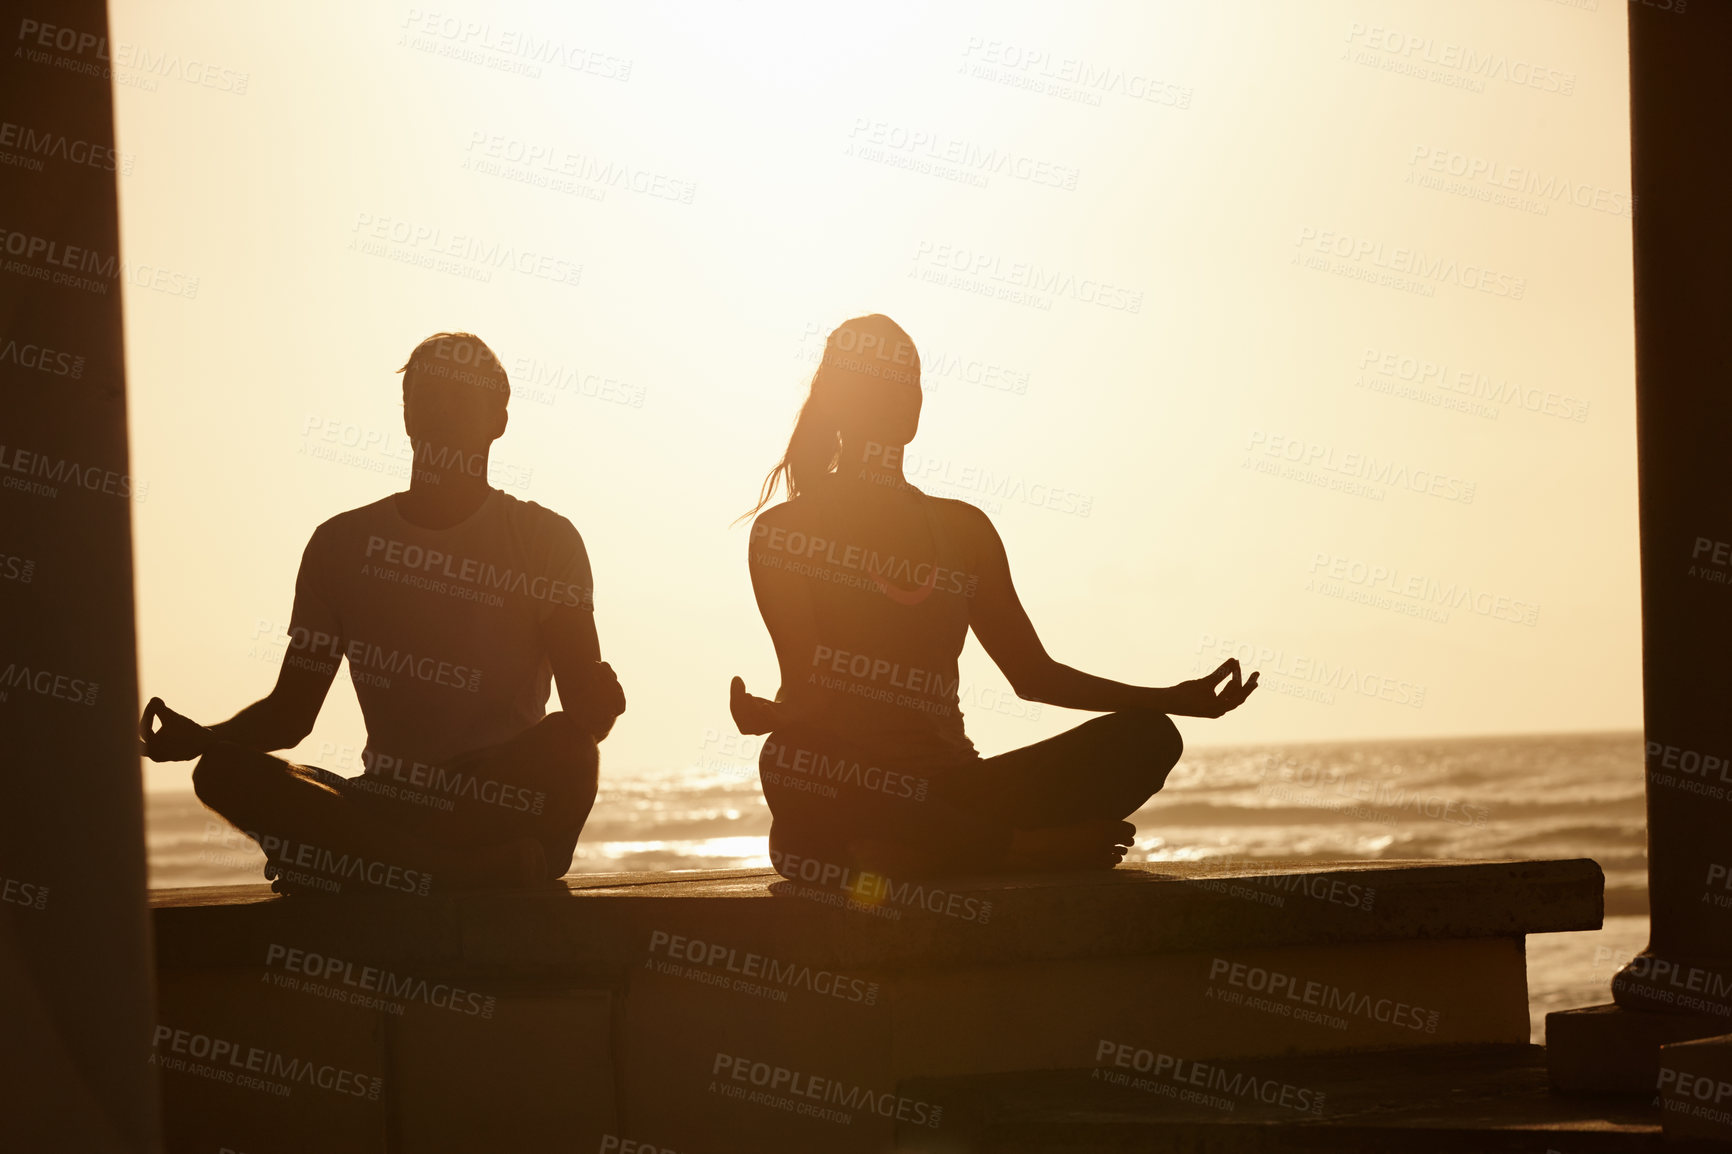 Buy stock photo Shot of a couple meditating by the sea at sunset